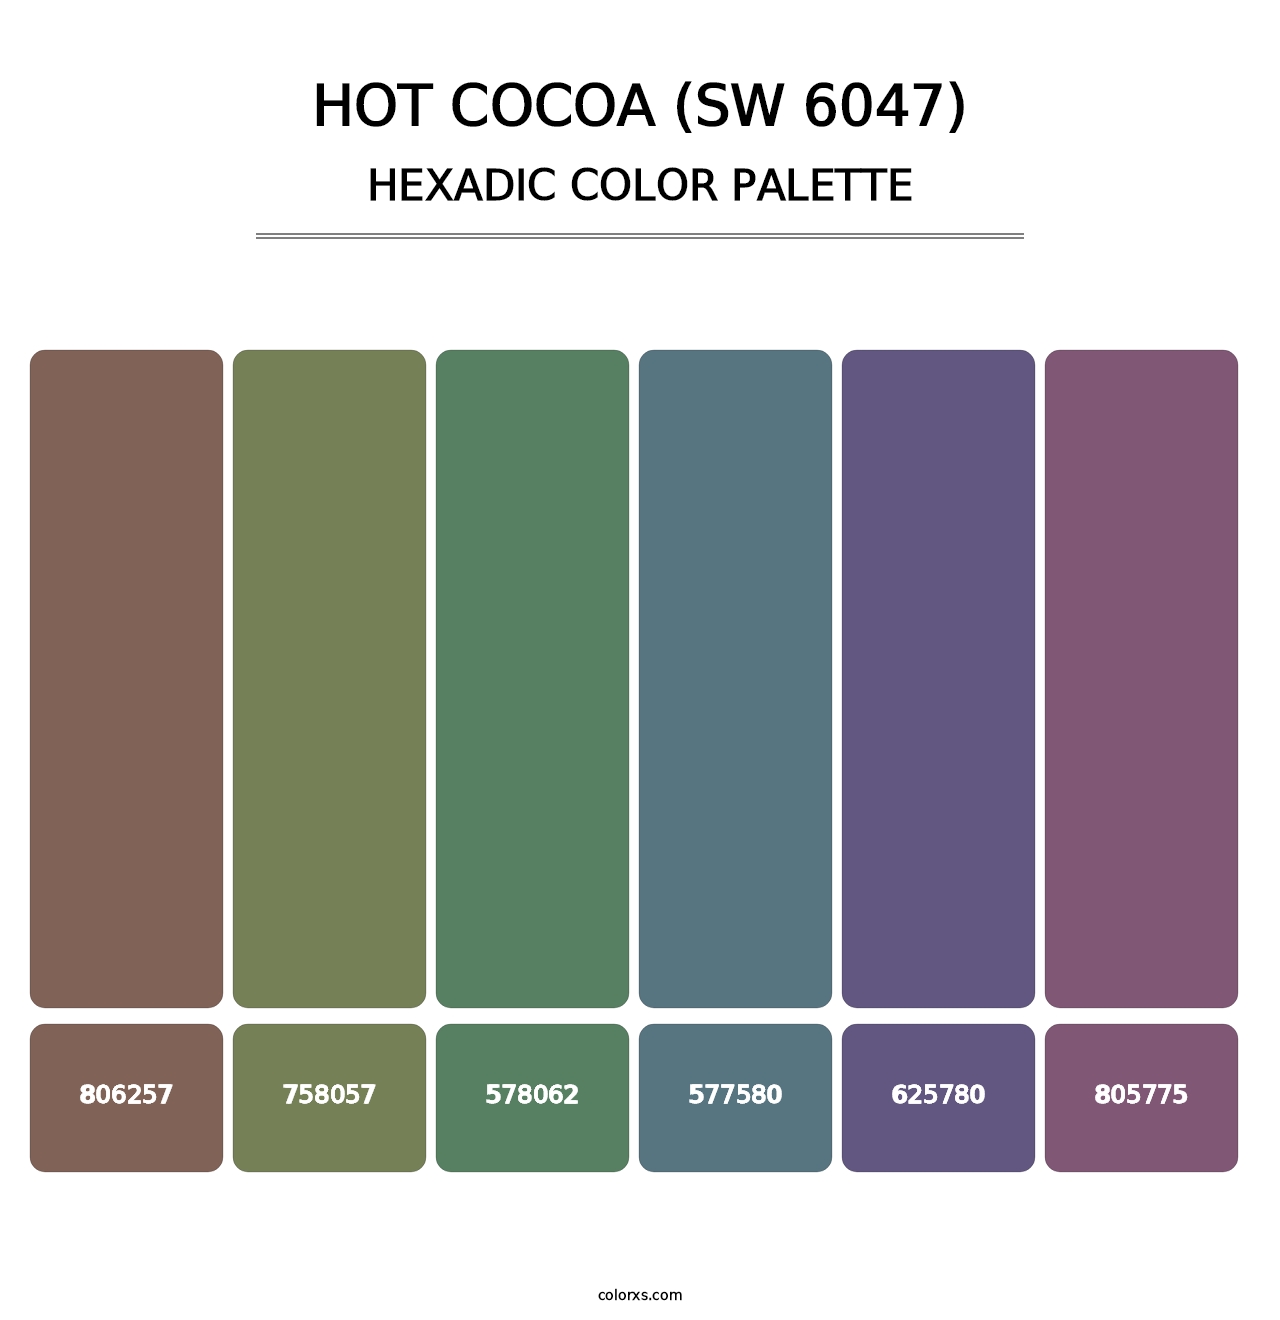 Hot Cocoa (SW 6047) - Hexadic Color Palette